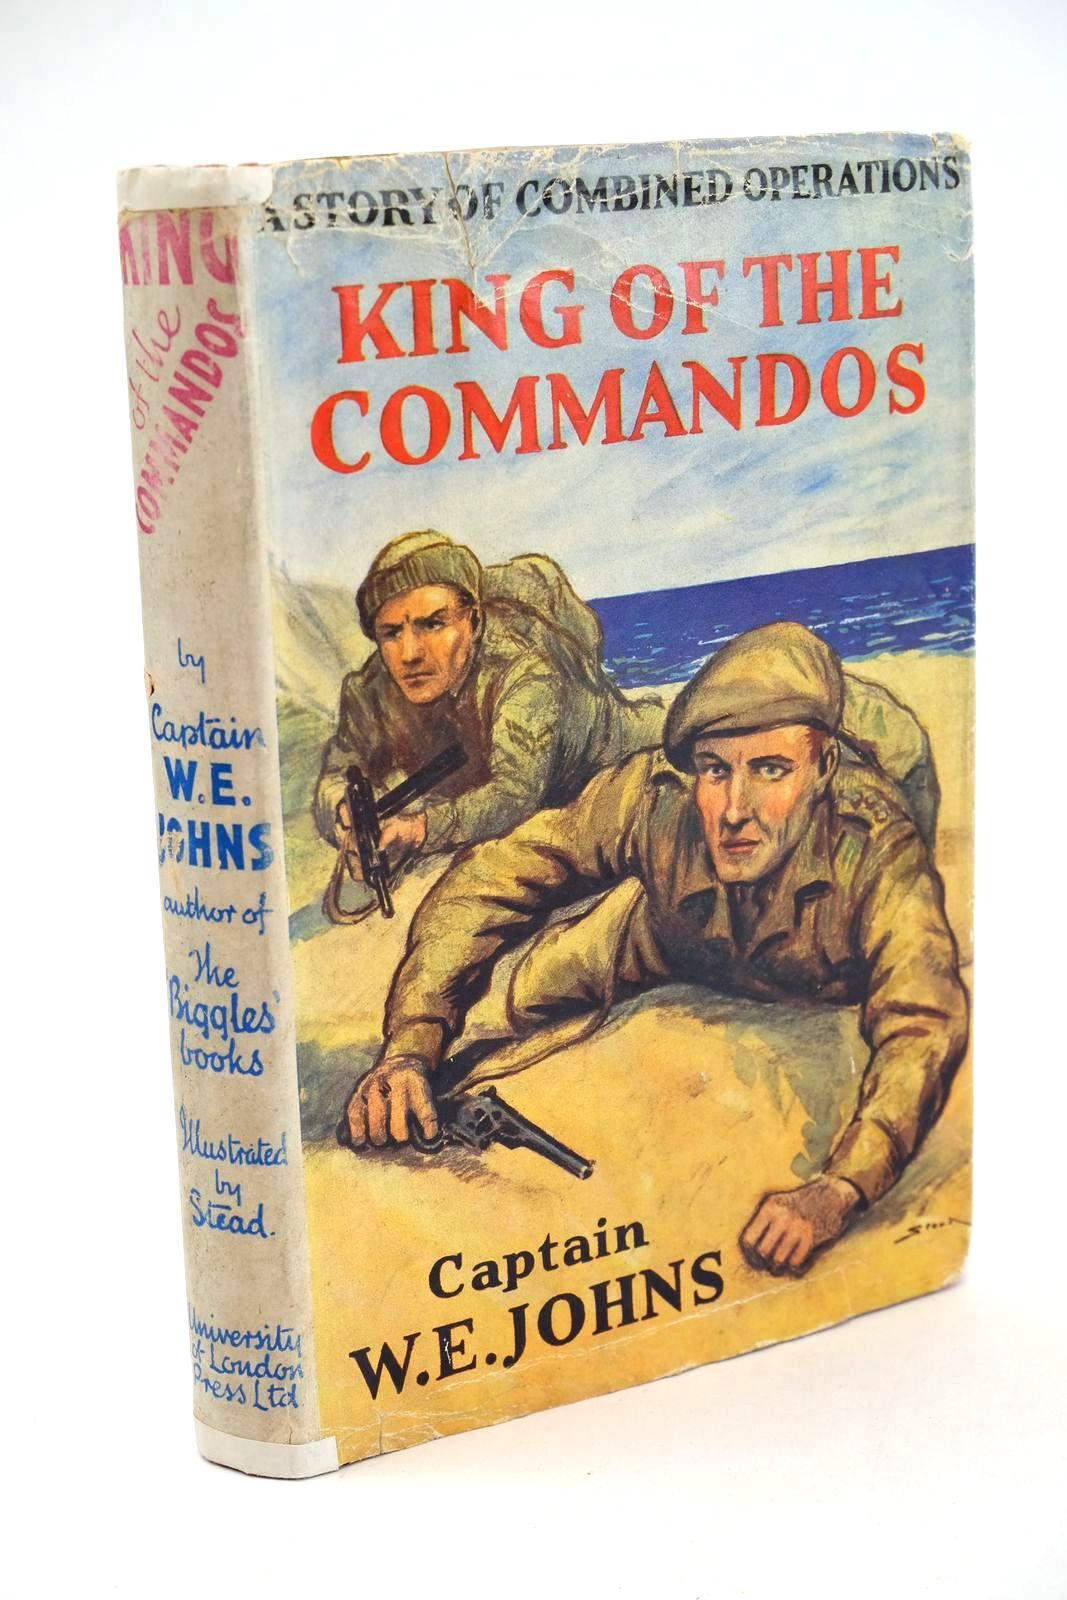 Photo of KING OF THE COMMANDOS written by Johns, W.E. illustrated by Stead,  published by University of London Press Ltd. (STOCK CODE: 1324284)  for sale by Stella & Rose's Books